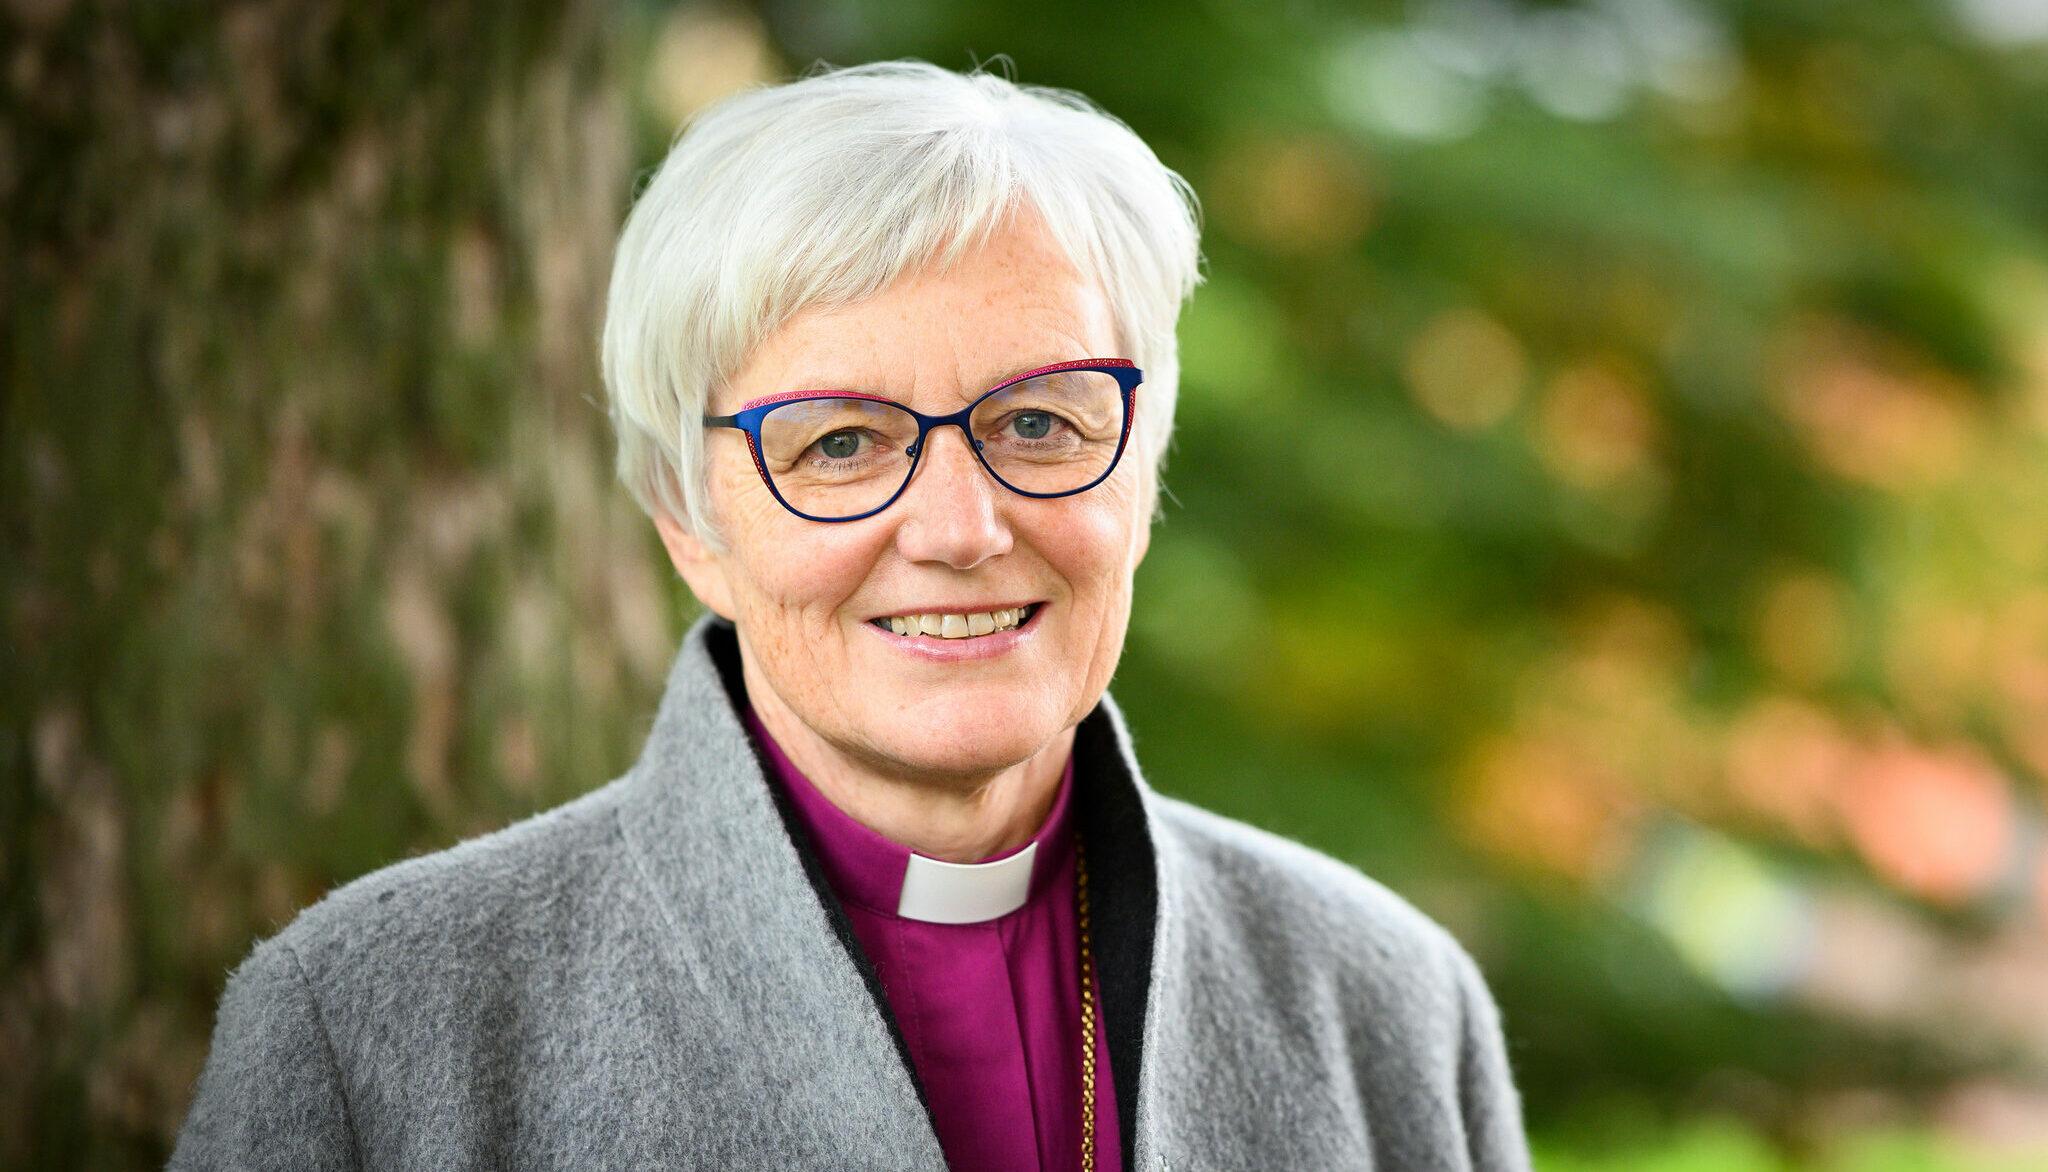 Outdoor portrait of Antje Jackelén, wearing a purple shirt with a &quot;priest collar&quot; and a grey cardigan.